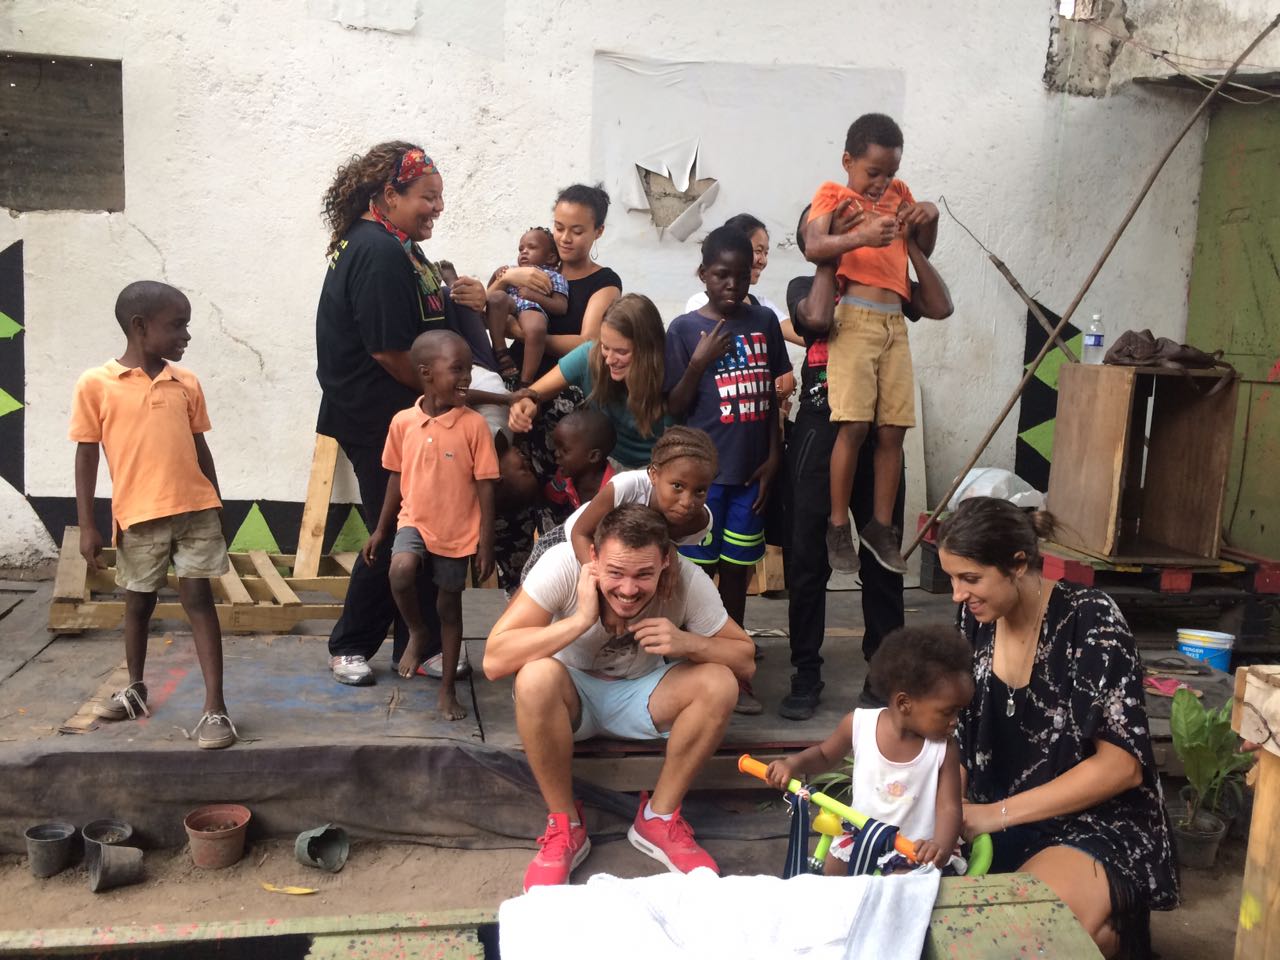 shea dodson plays with children on her social work trip to jamaica